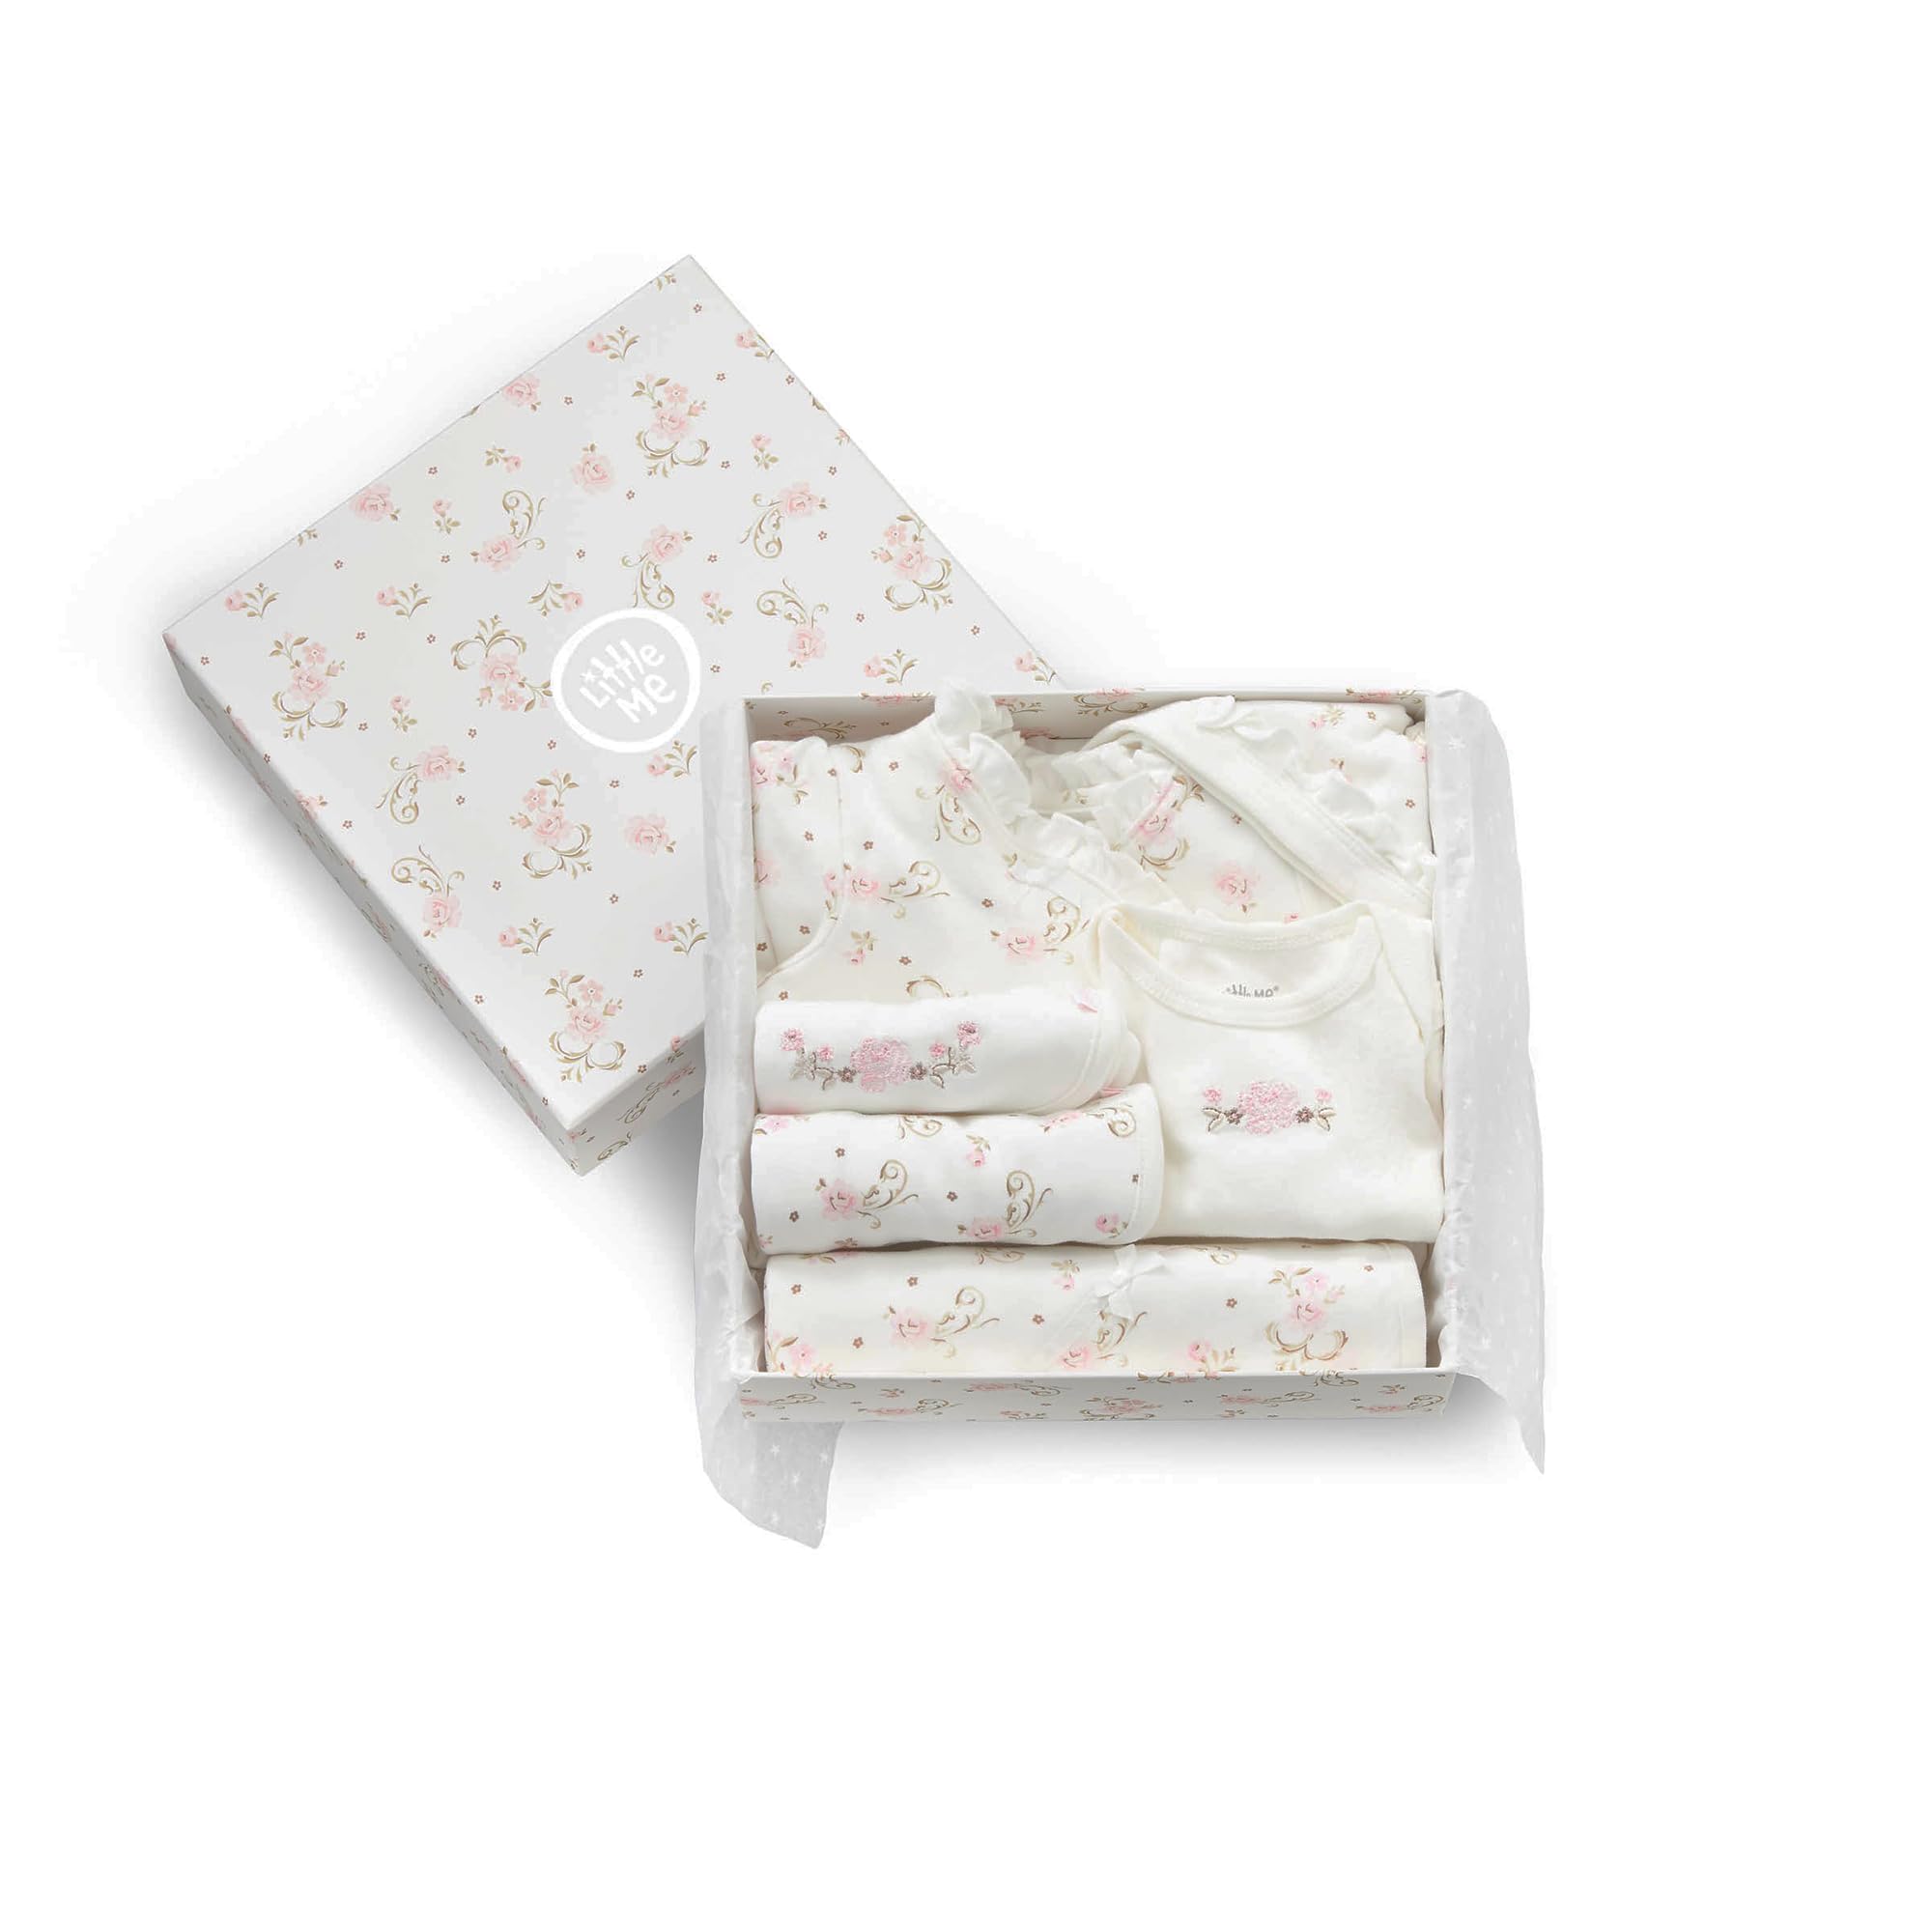 Little Me Layette Gift Sets